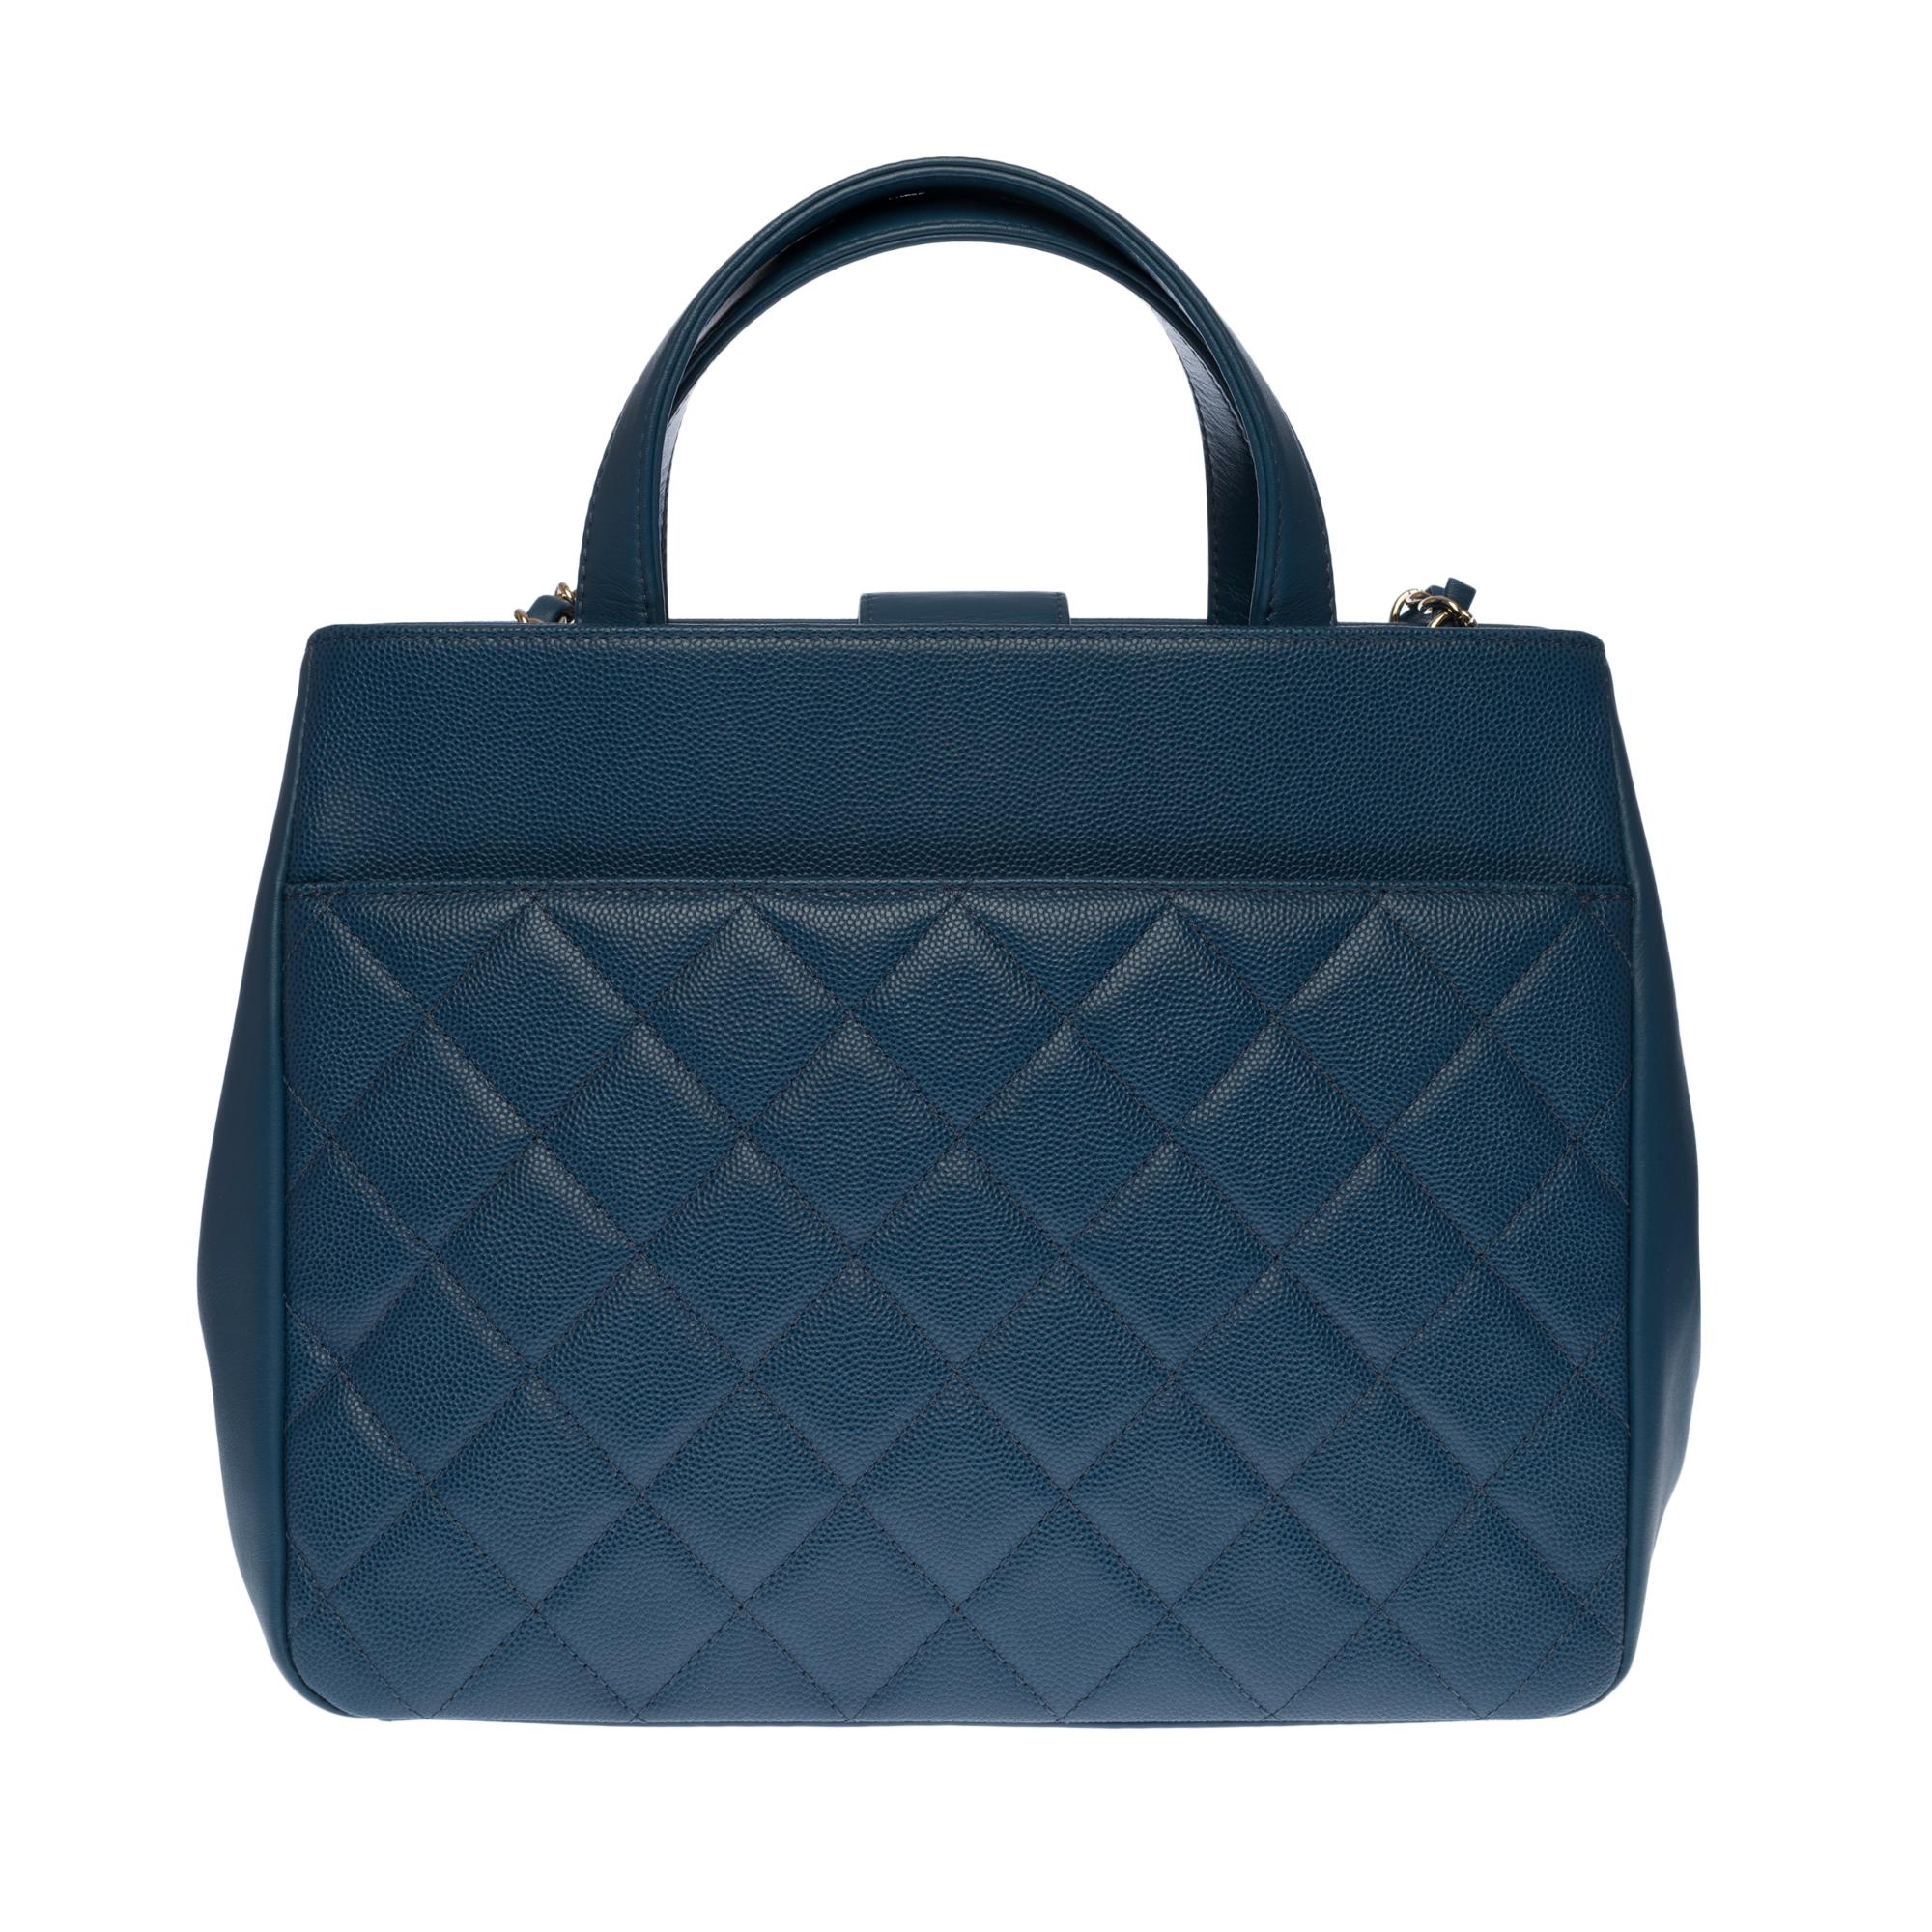 Stunning Chanel Classique Business Affinity Tote Bag in petrol blue caviar leather, gold-tone metal hardware, a gold-tone metal handle chain intertwined with blue leather allowing a hand or shoulder or shoulder strap
Closure with blue leather strap